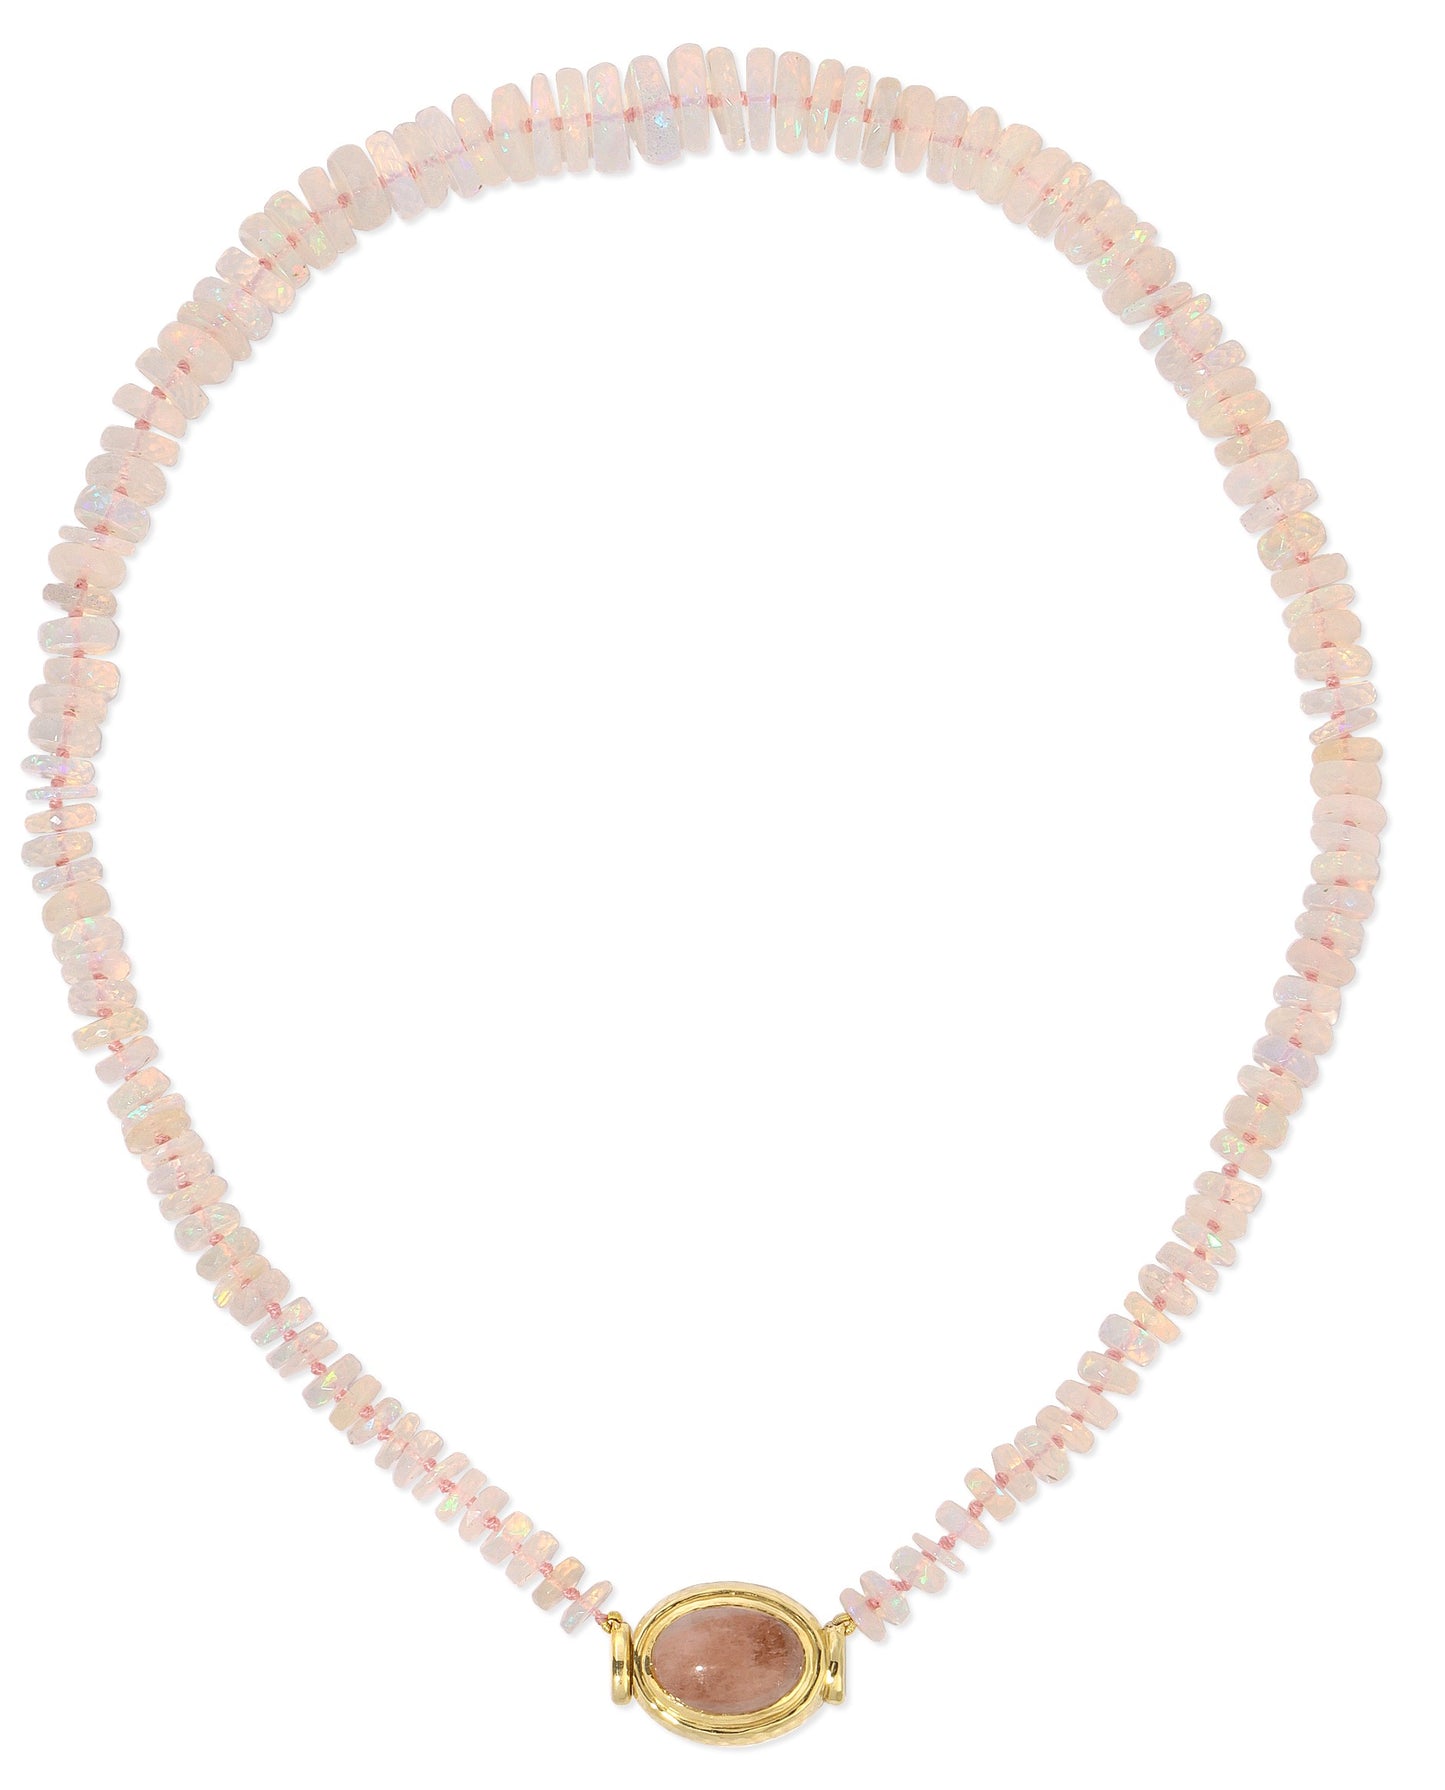 Pink Beryl and Opal Bead Necklace